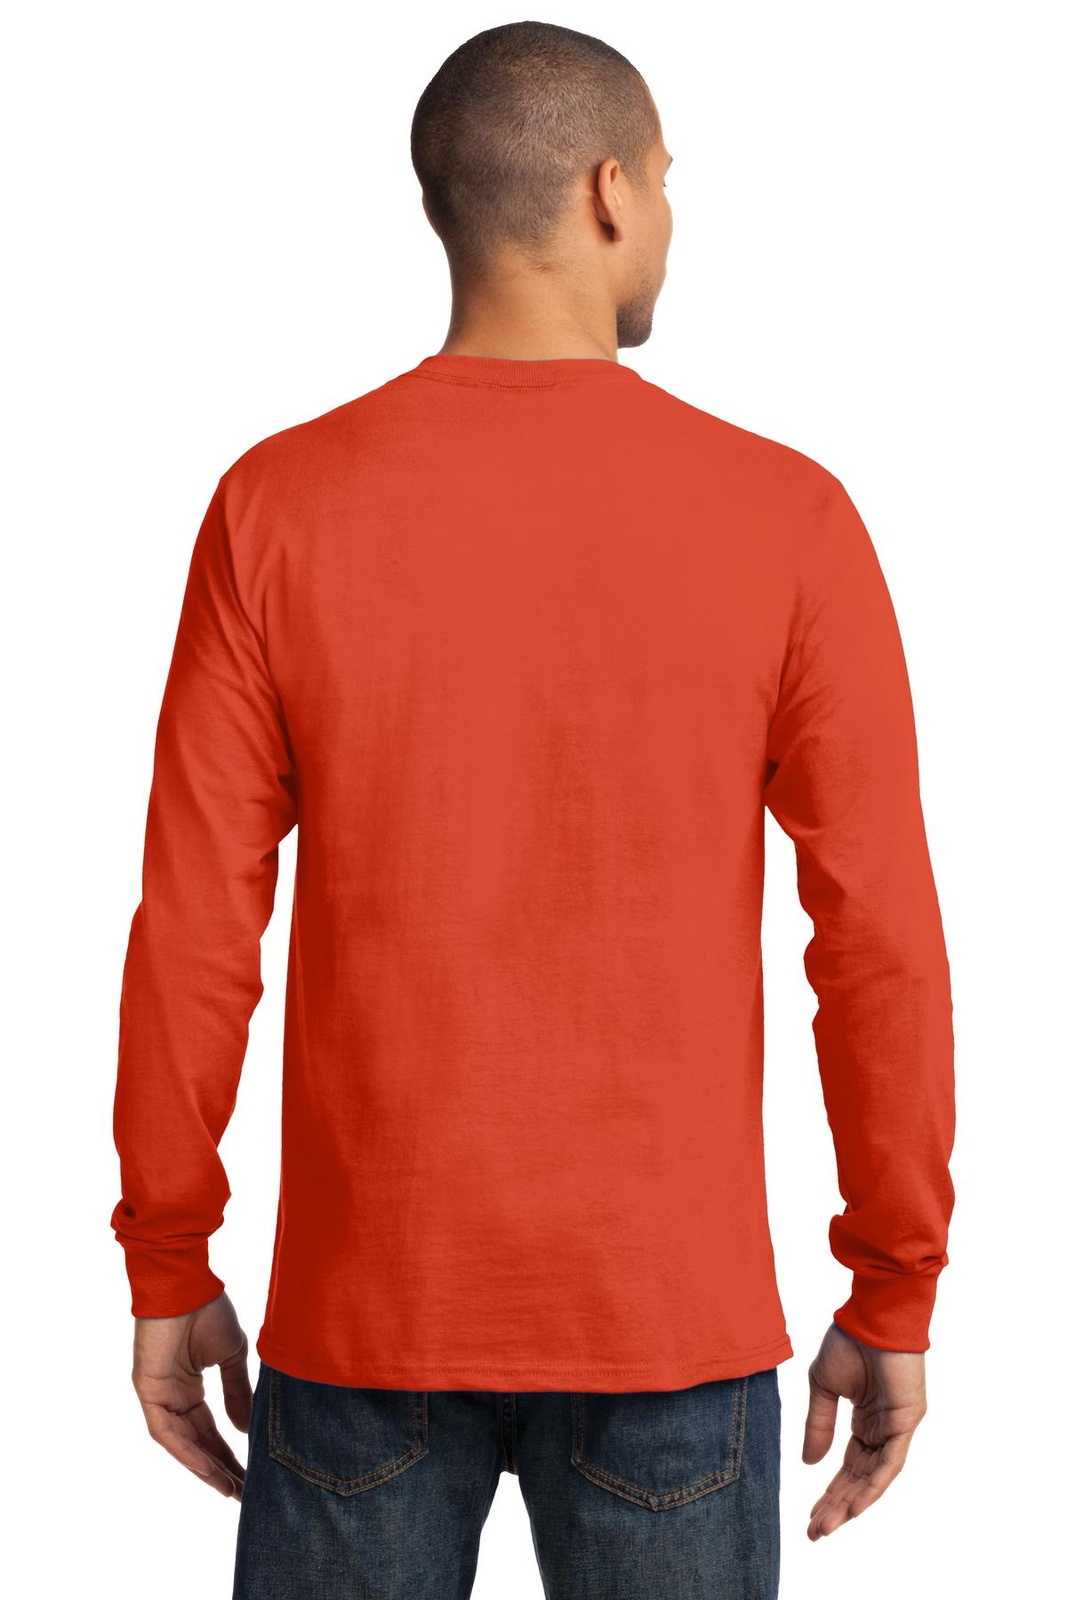 Port & Company PC61LST Tall Long Sleeve Essential Tee - Orange - HIT a Double - 1